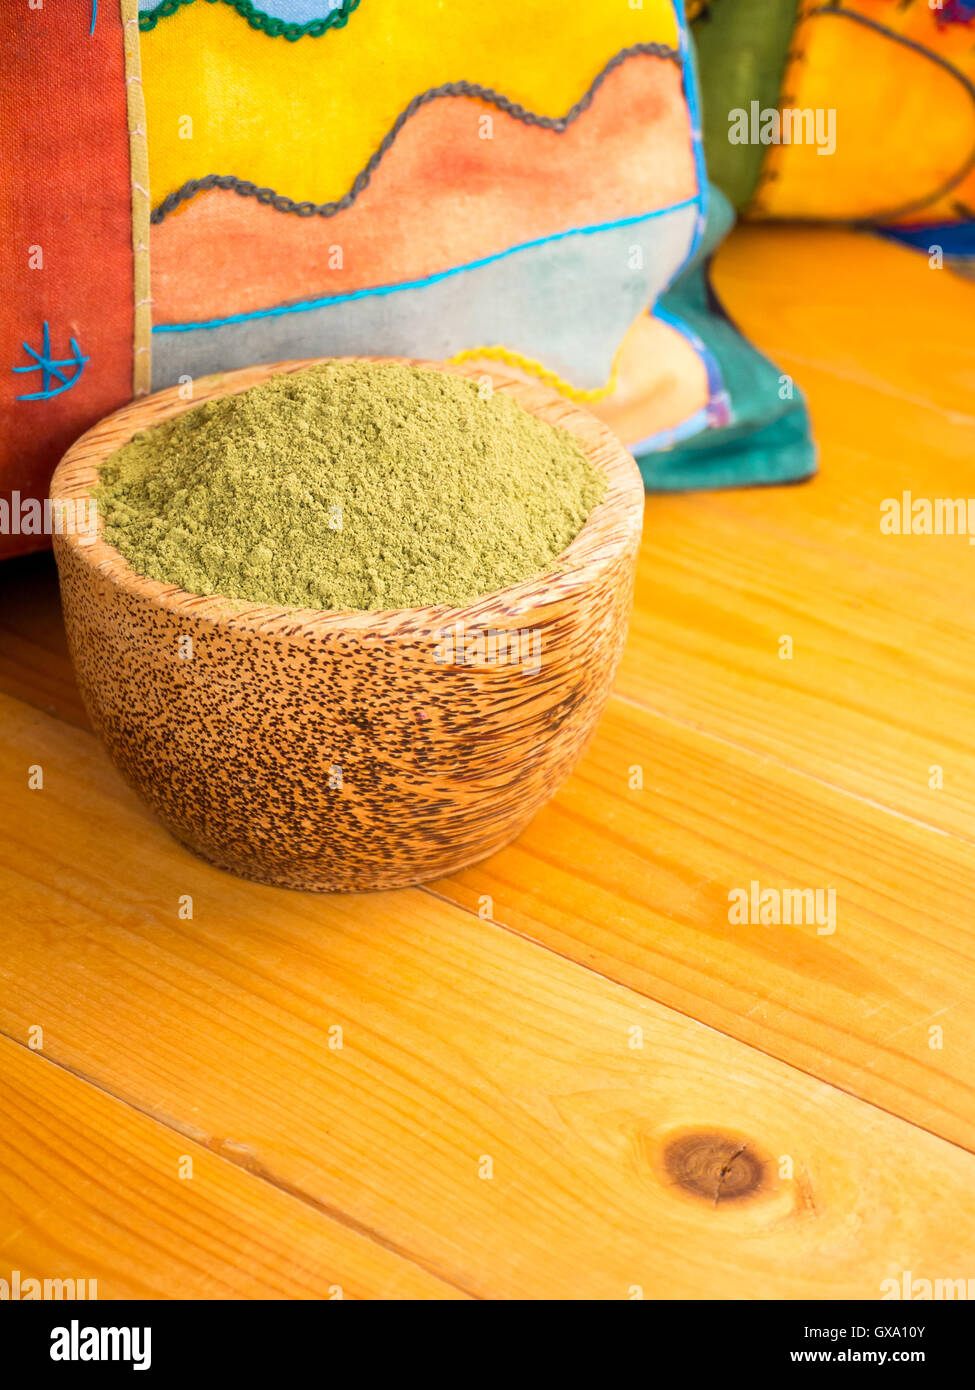 Henna powder hair colourant in the coconut bowl on the bright pillows background Stock Photo